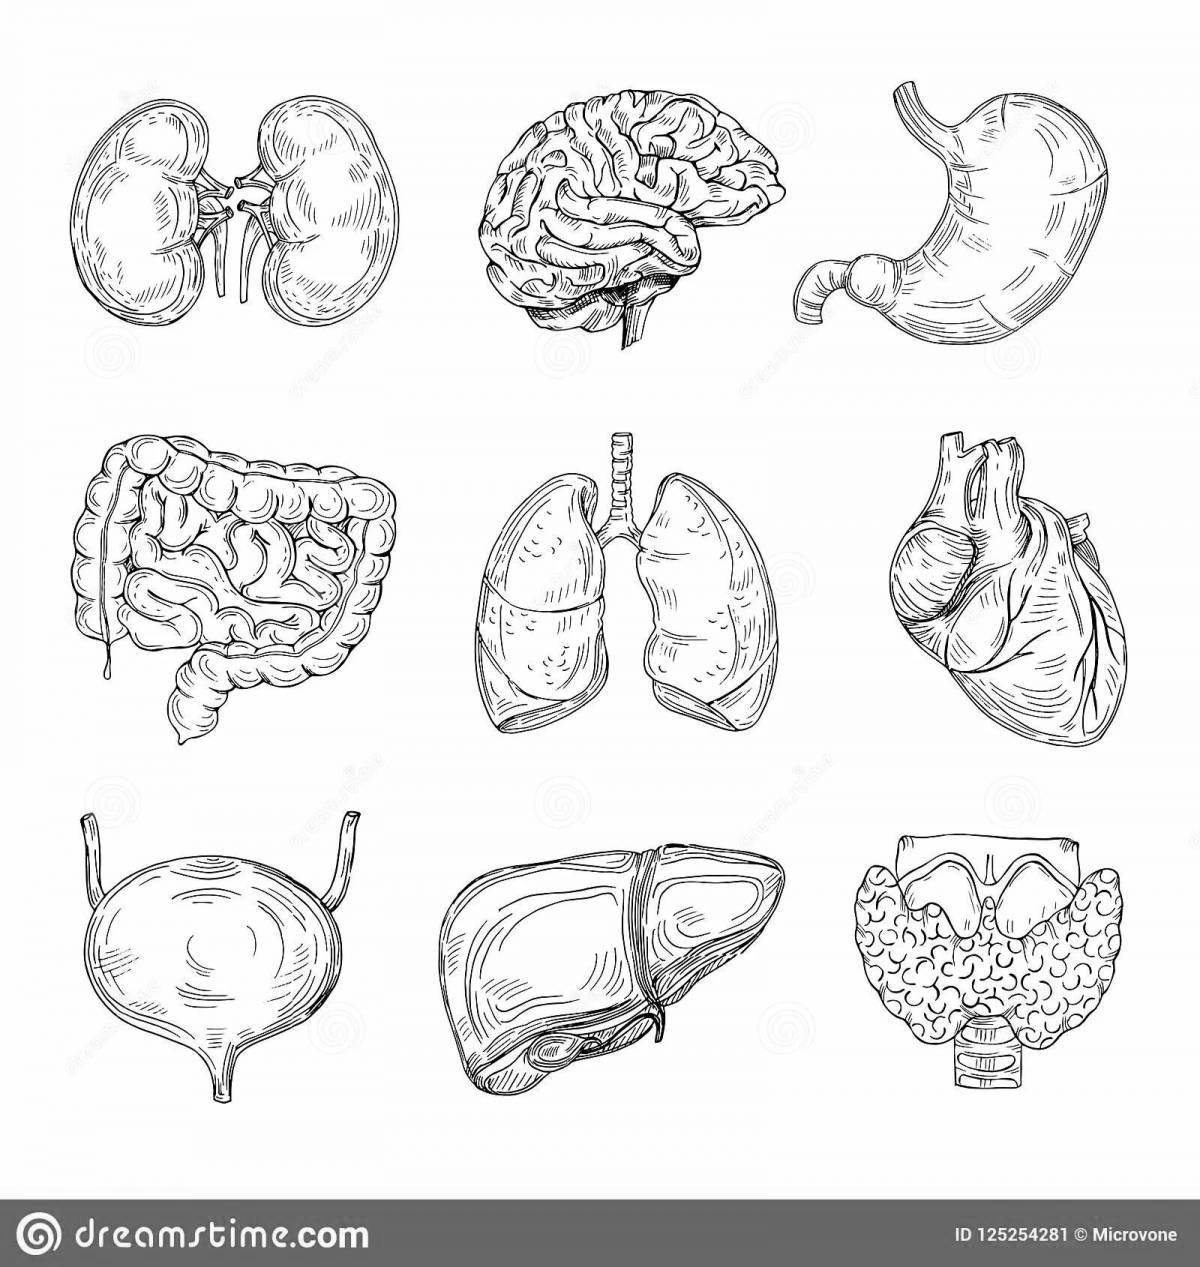 A fascinating coloring book of the human body with internal organs